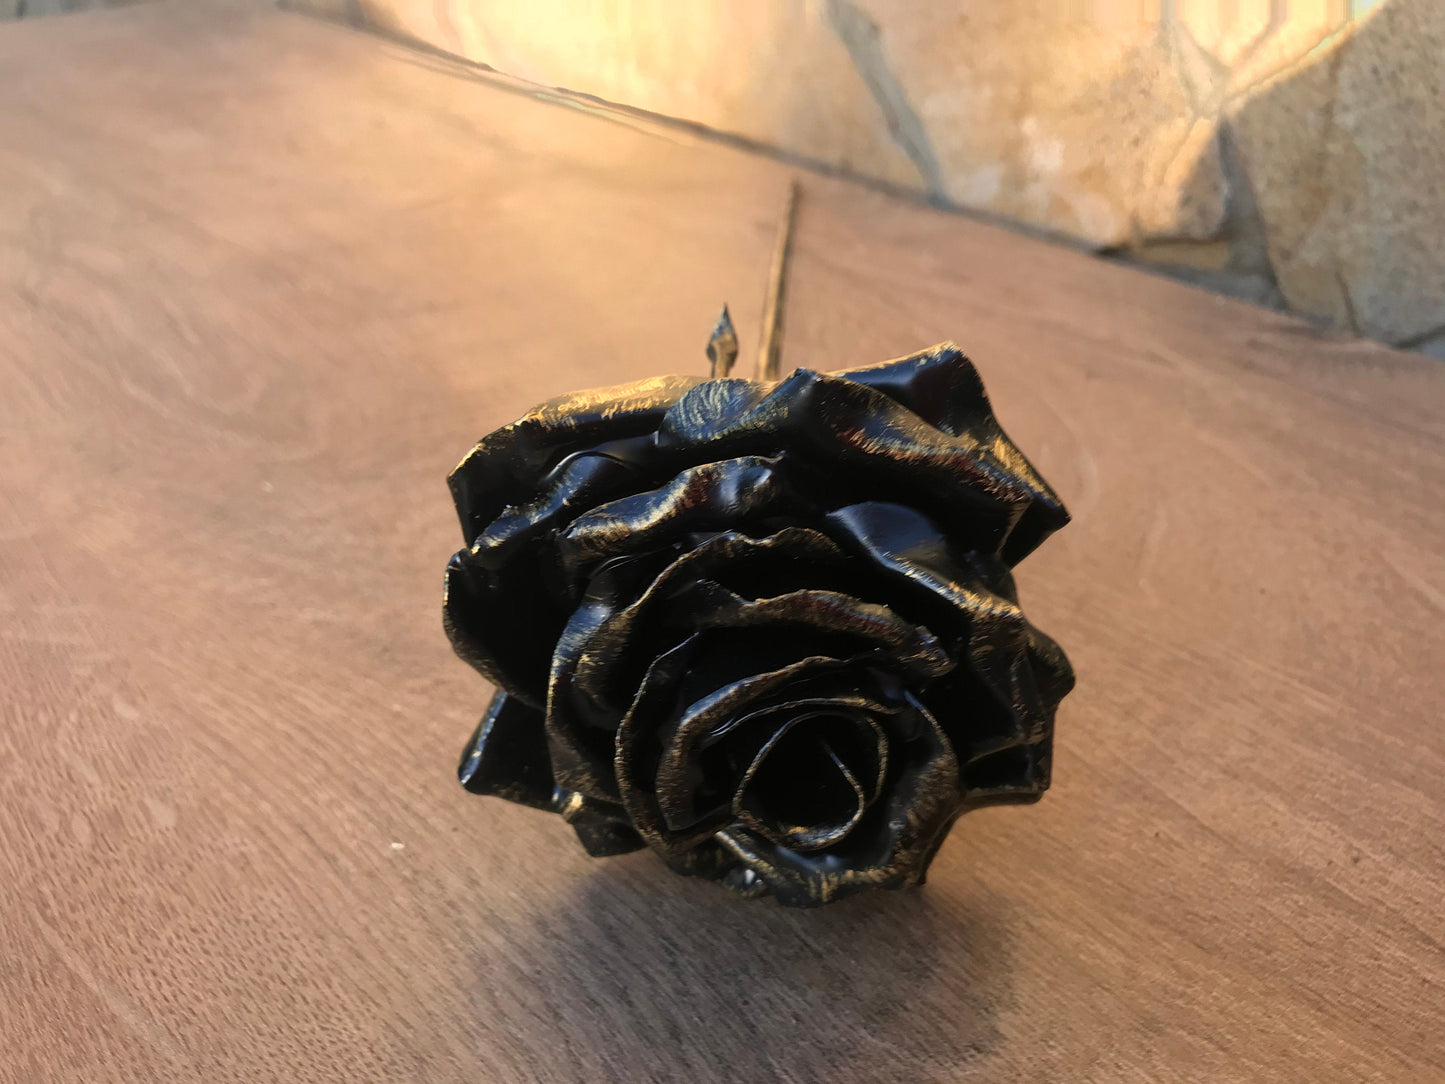 Forged rose, iron anniversary gift for her, iron gift for her, iron rose for her, wedding anniversary gift, iron anniversary, iron wedding